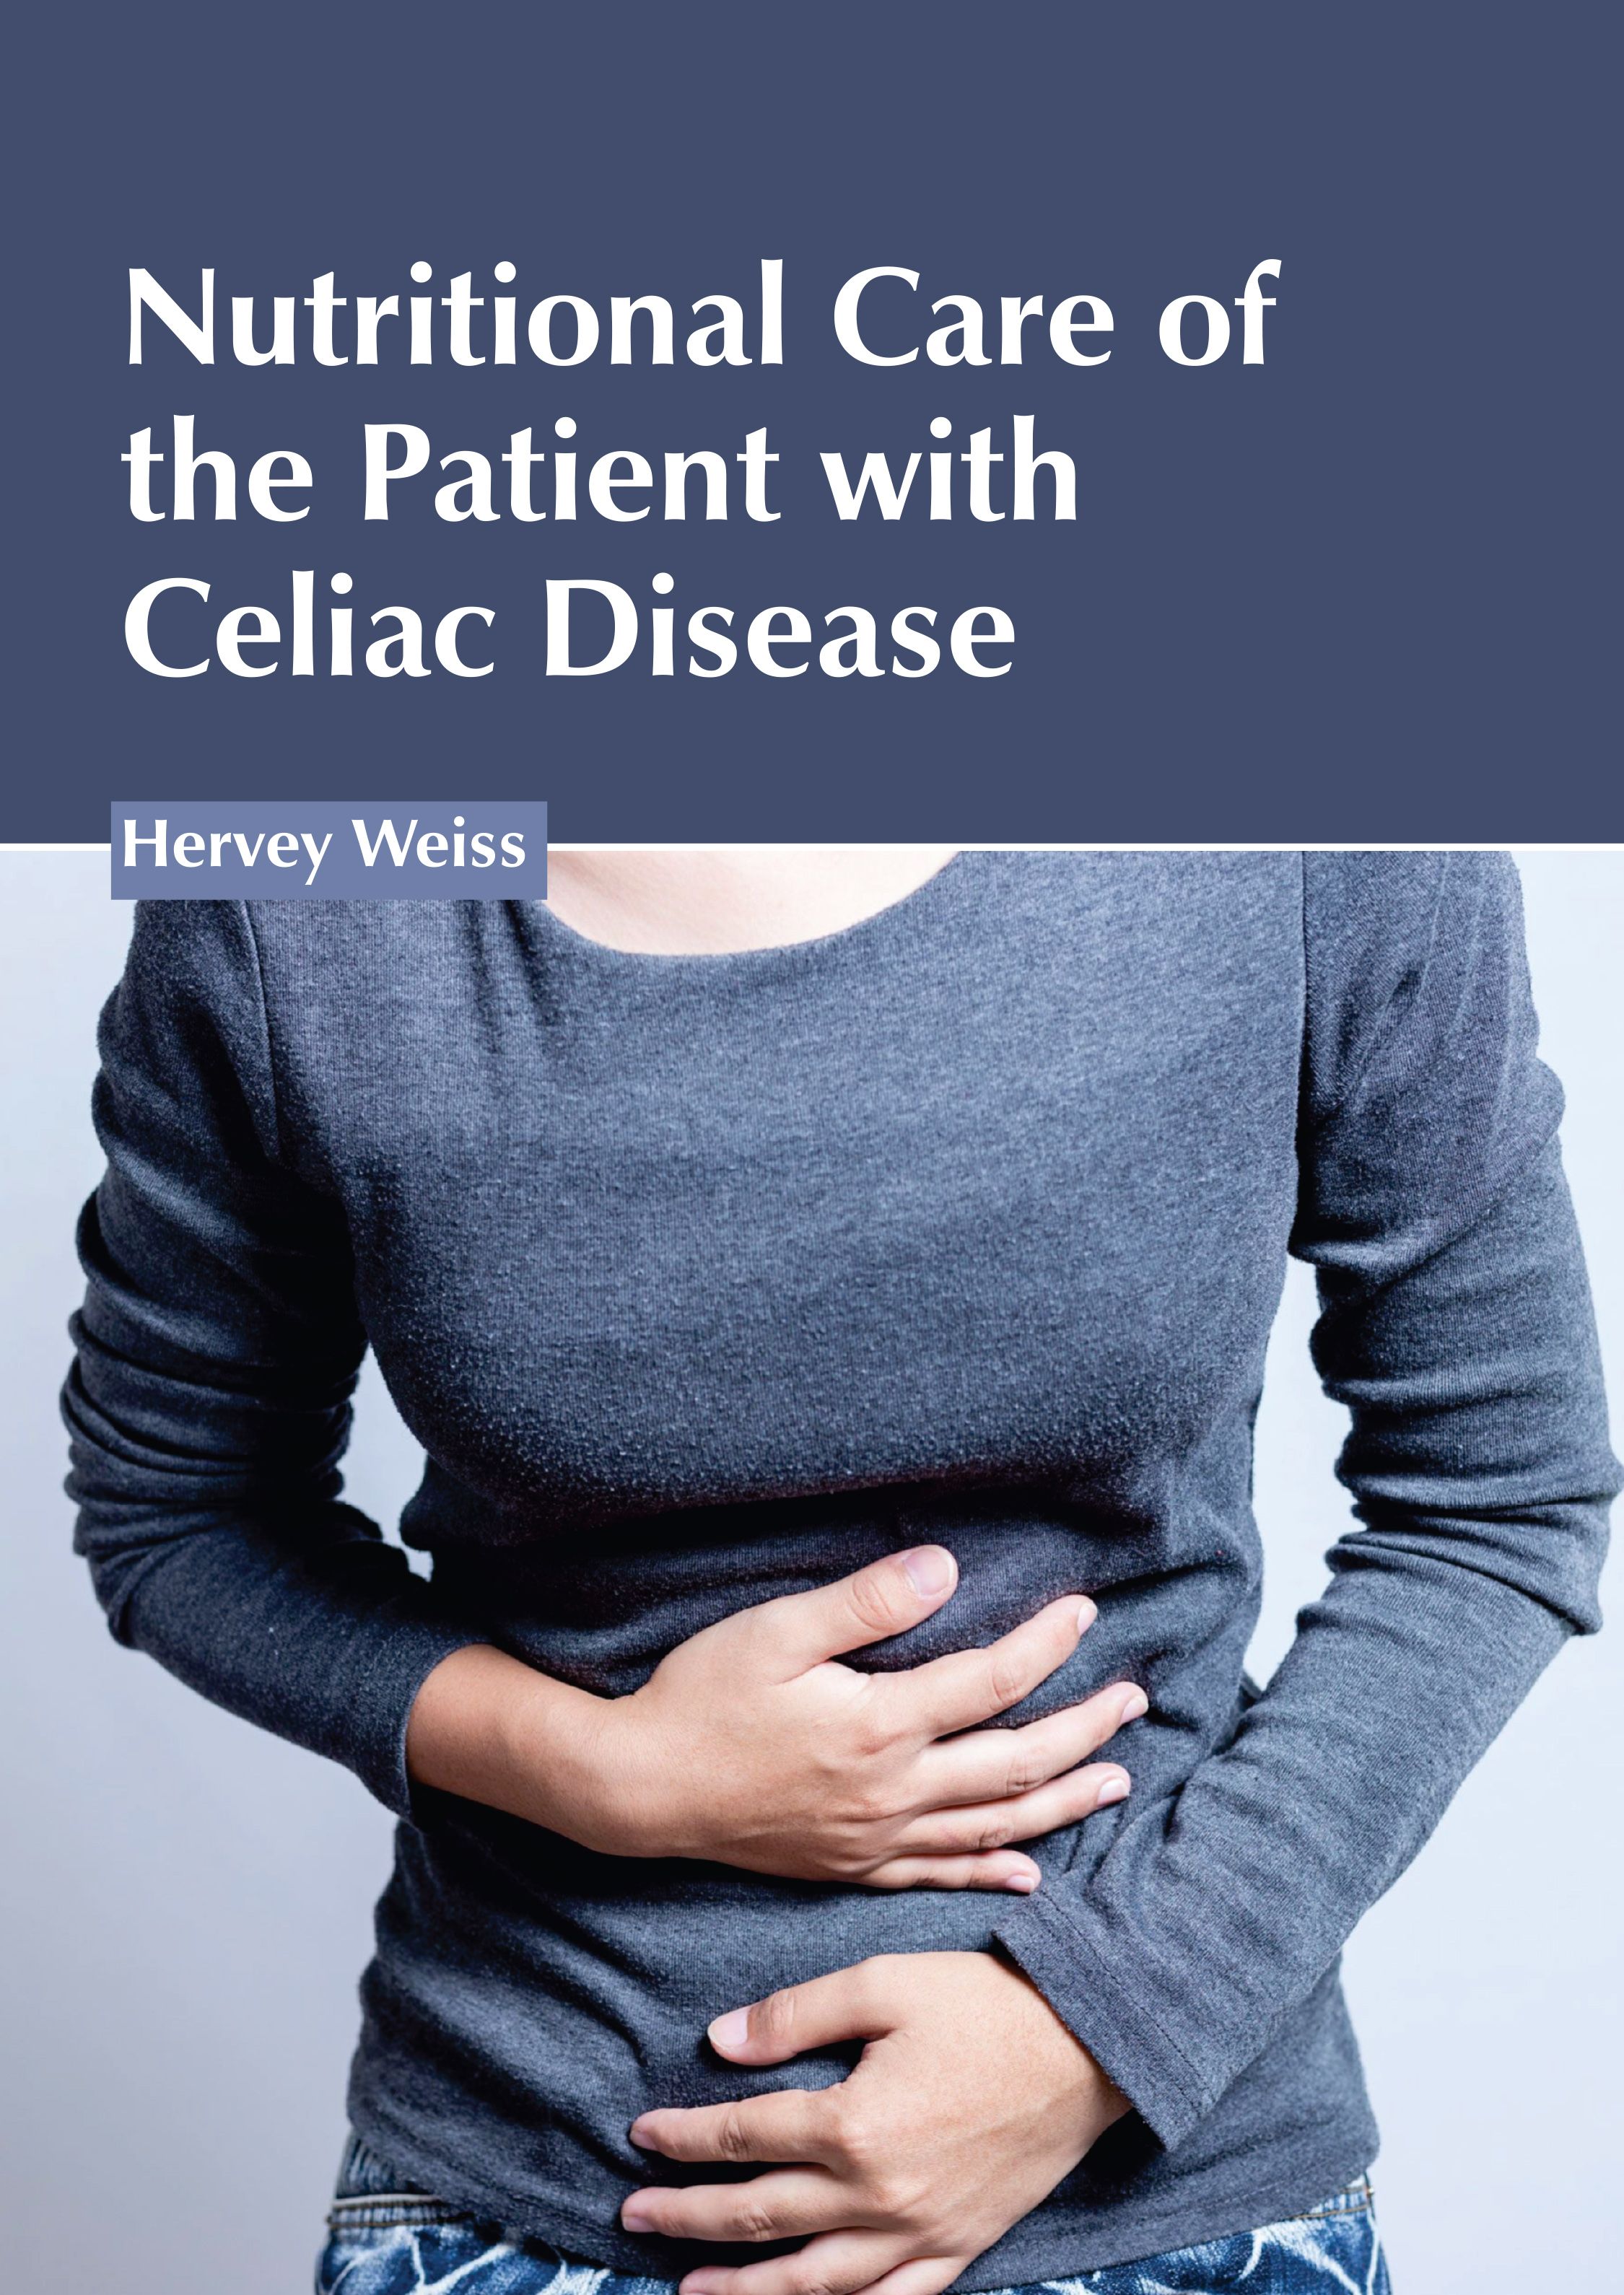 NUTRITIONAL CARE OF THE PATIENT WITH CELIAC DISEASE